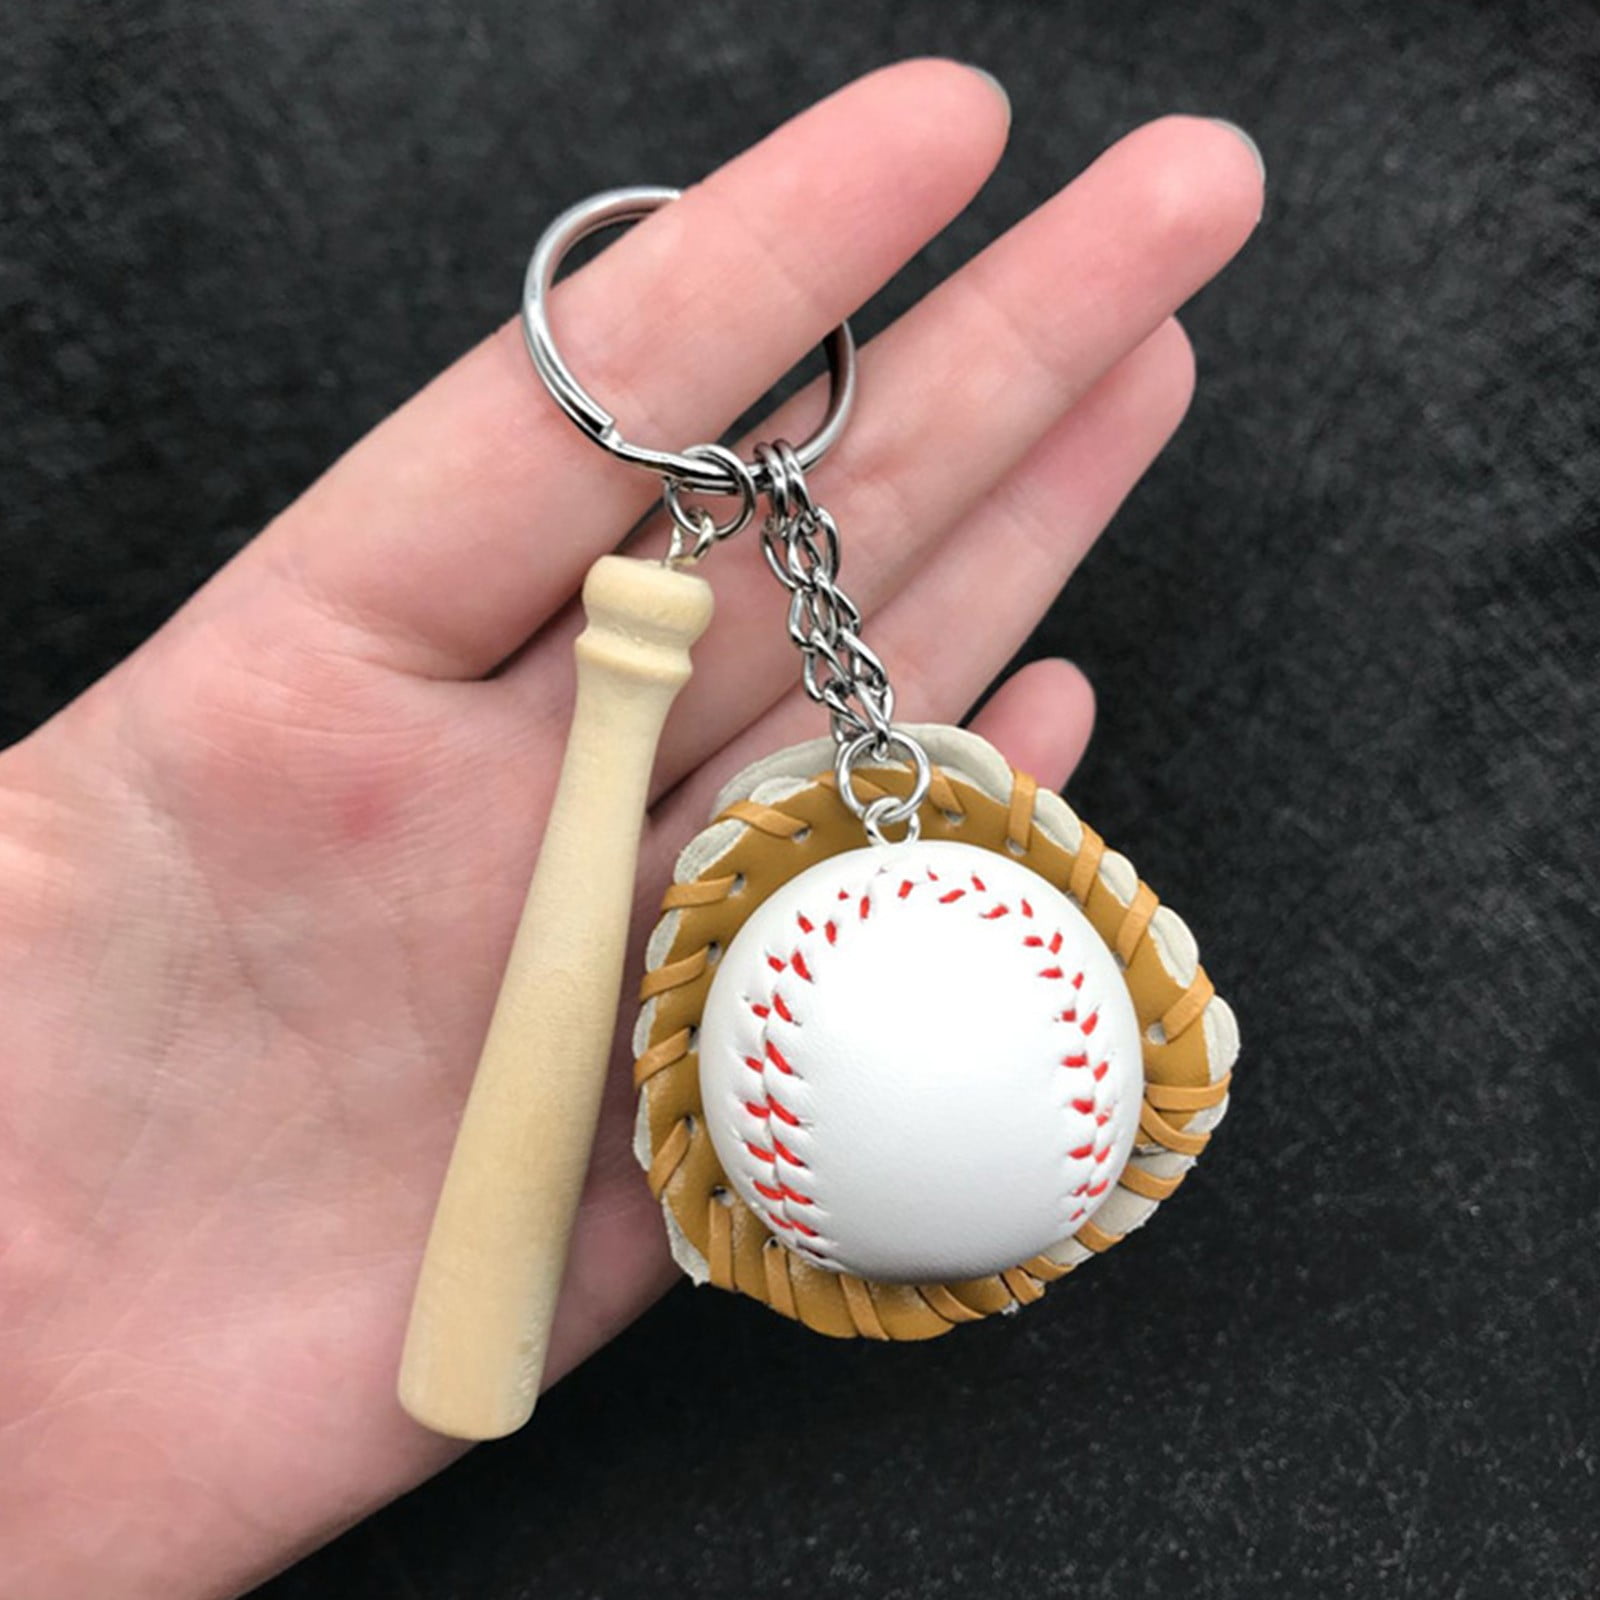  Toddmomy 12pcs Ball Keychain Keychains for Kids